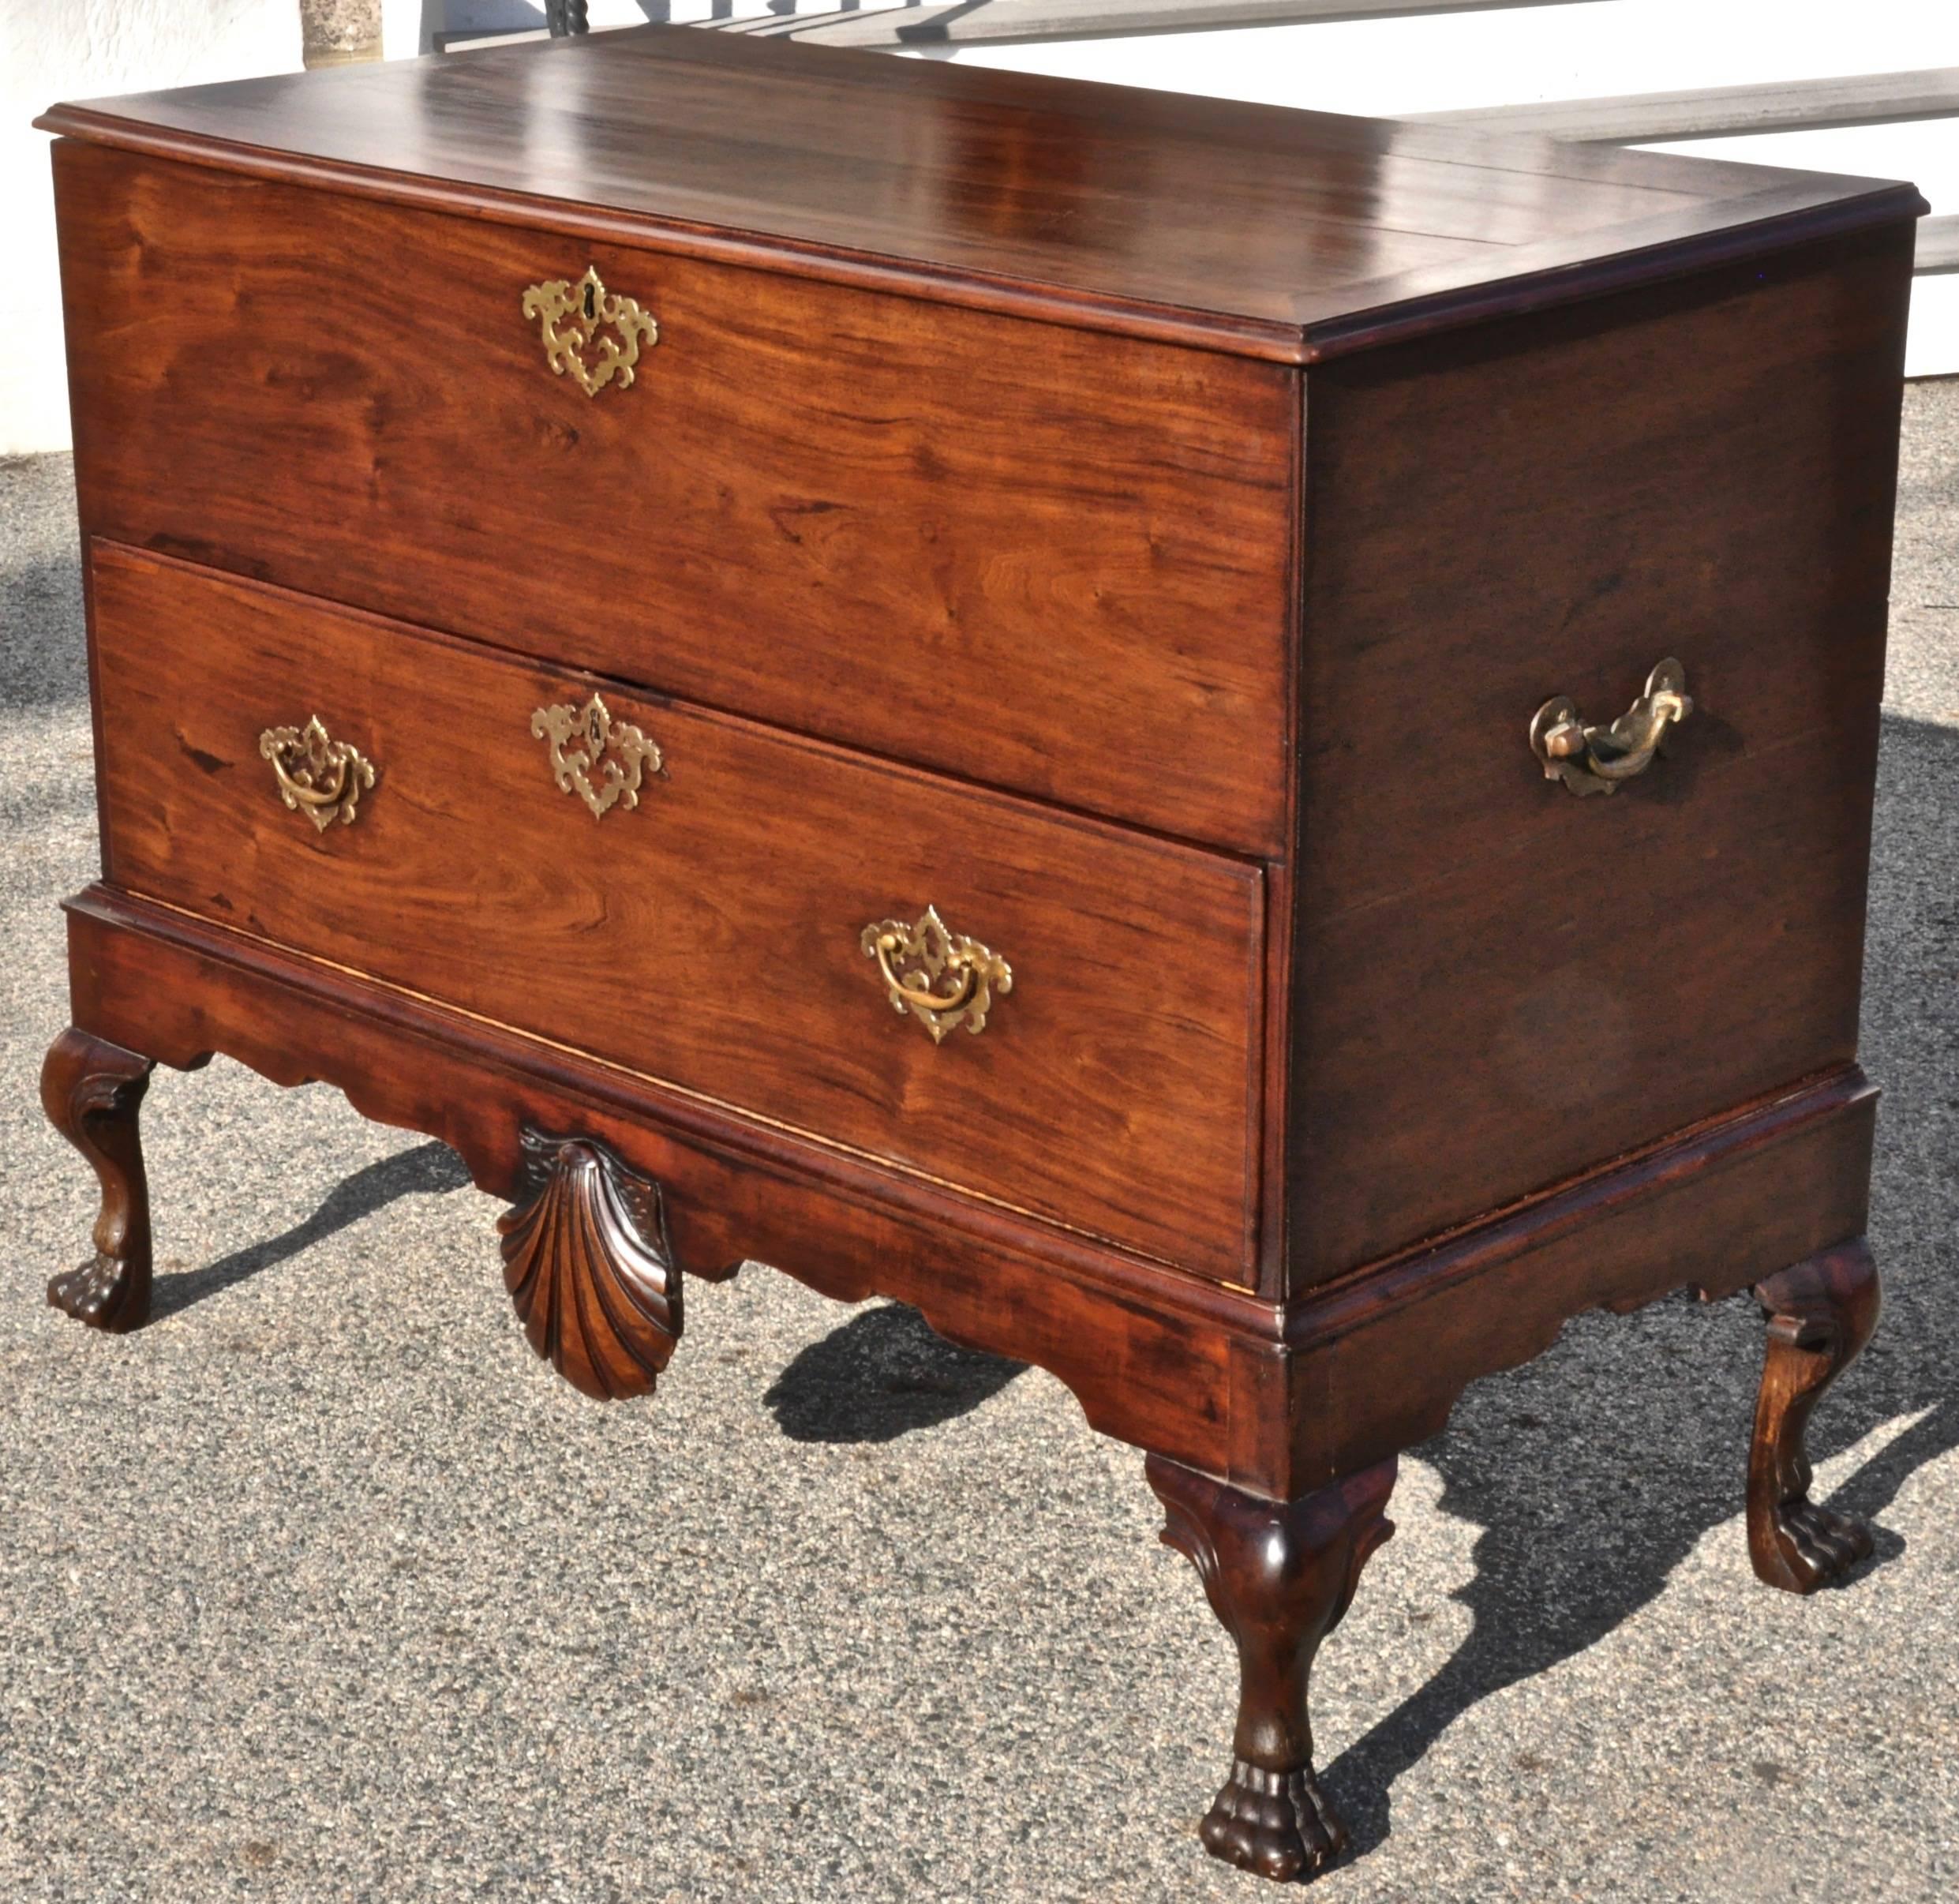 Period 18th century Irish Georgian Chippendale blanket chest on stand

A finely carved shell centered base with cabriole legs ending in Irish Paw Lion feet.
Original hardware. One bottom drawer and upper blanket chest.

There is a series of